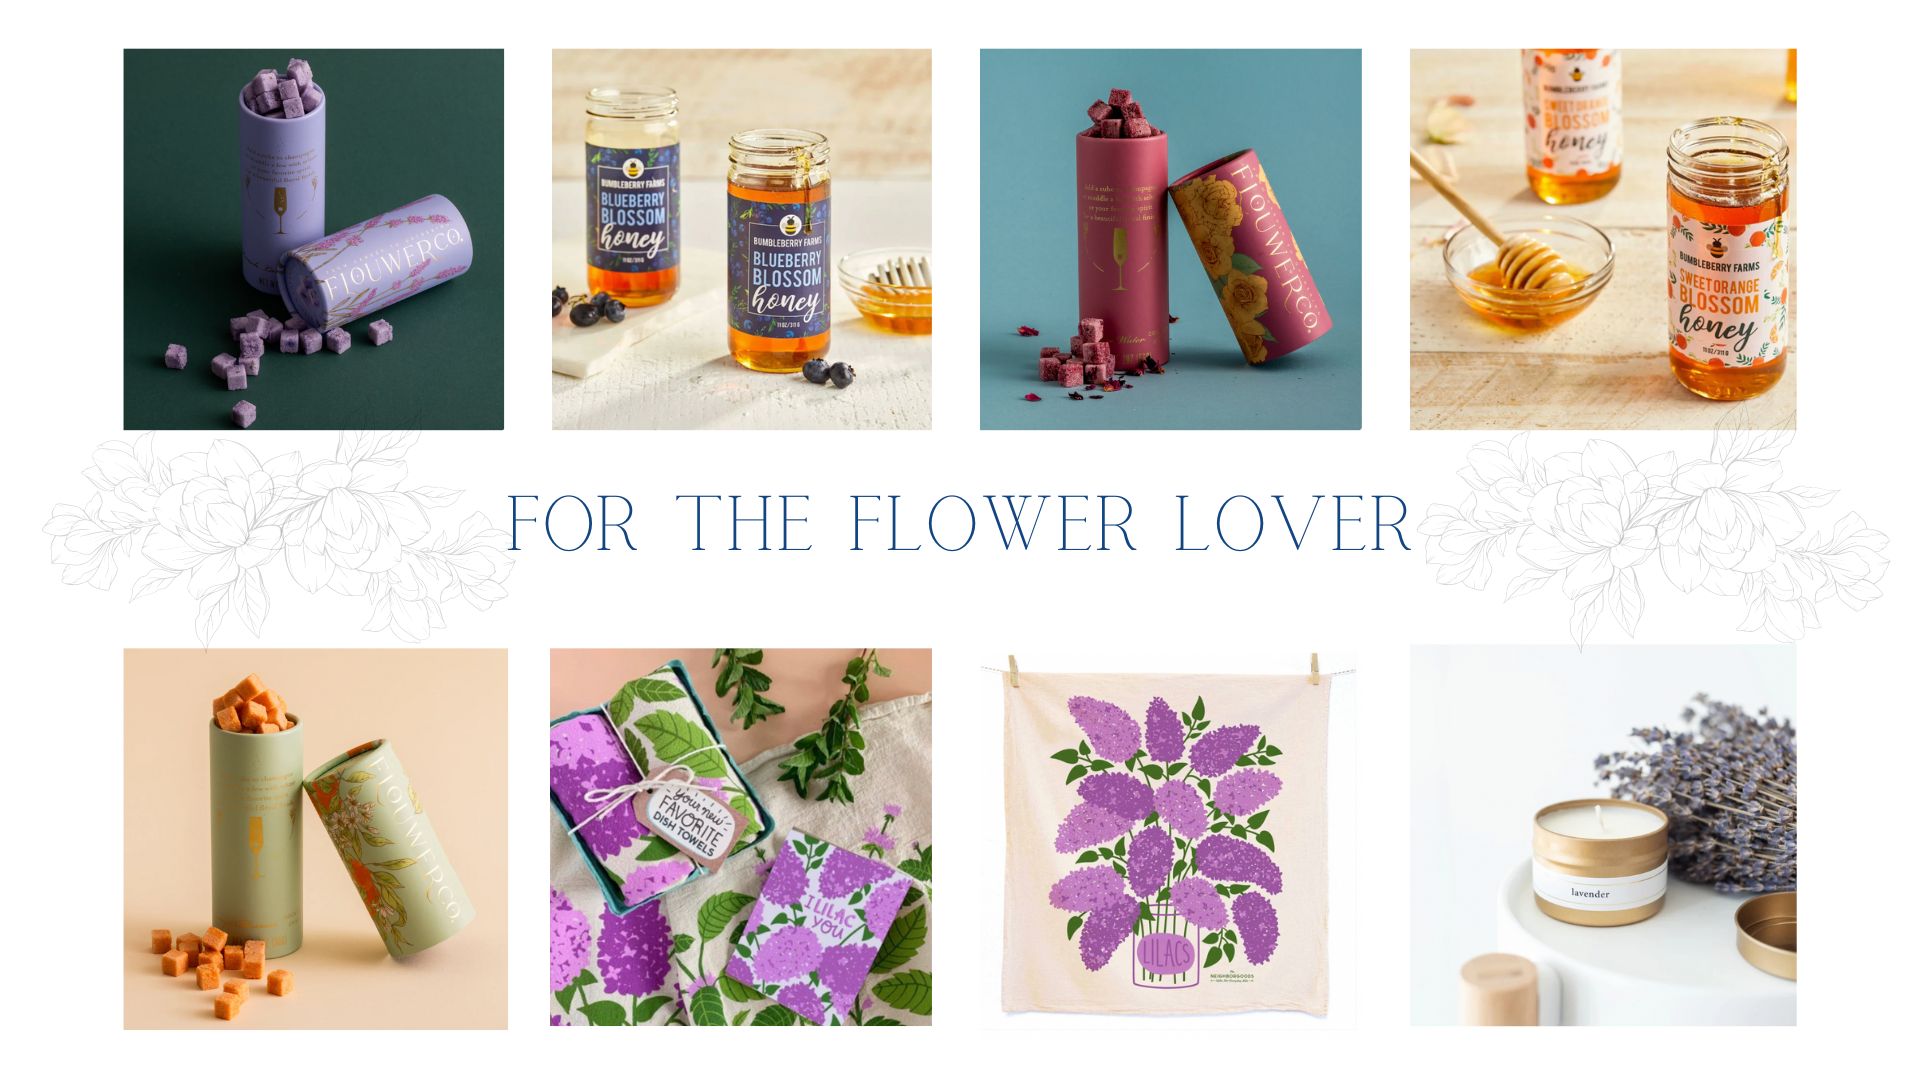 Banner with images of Mother's Day gifts related to flowers